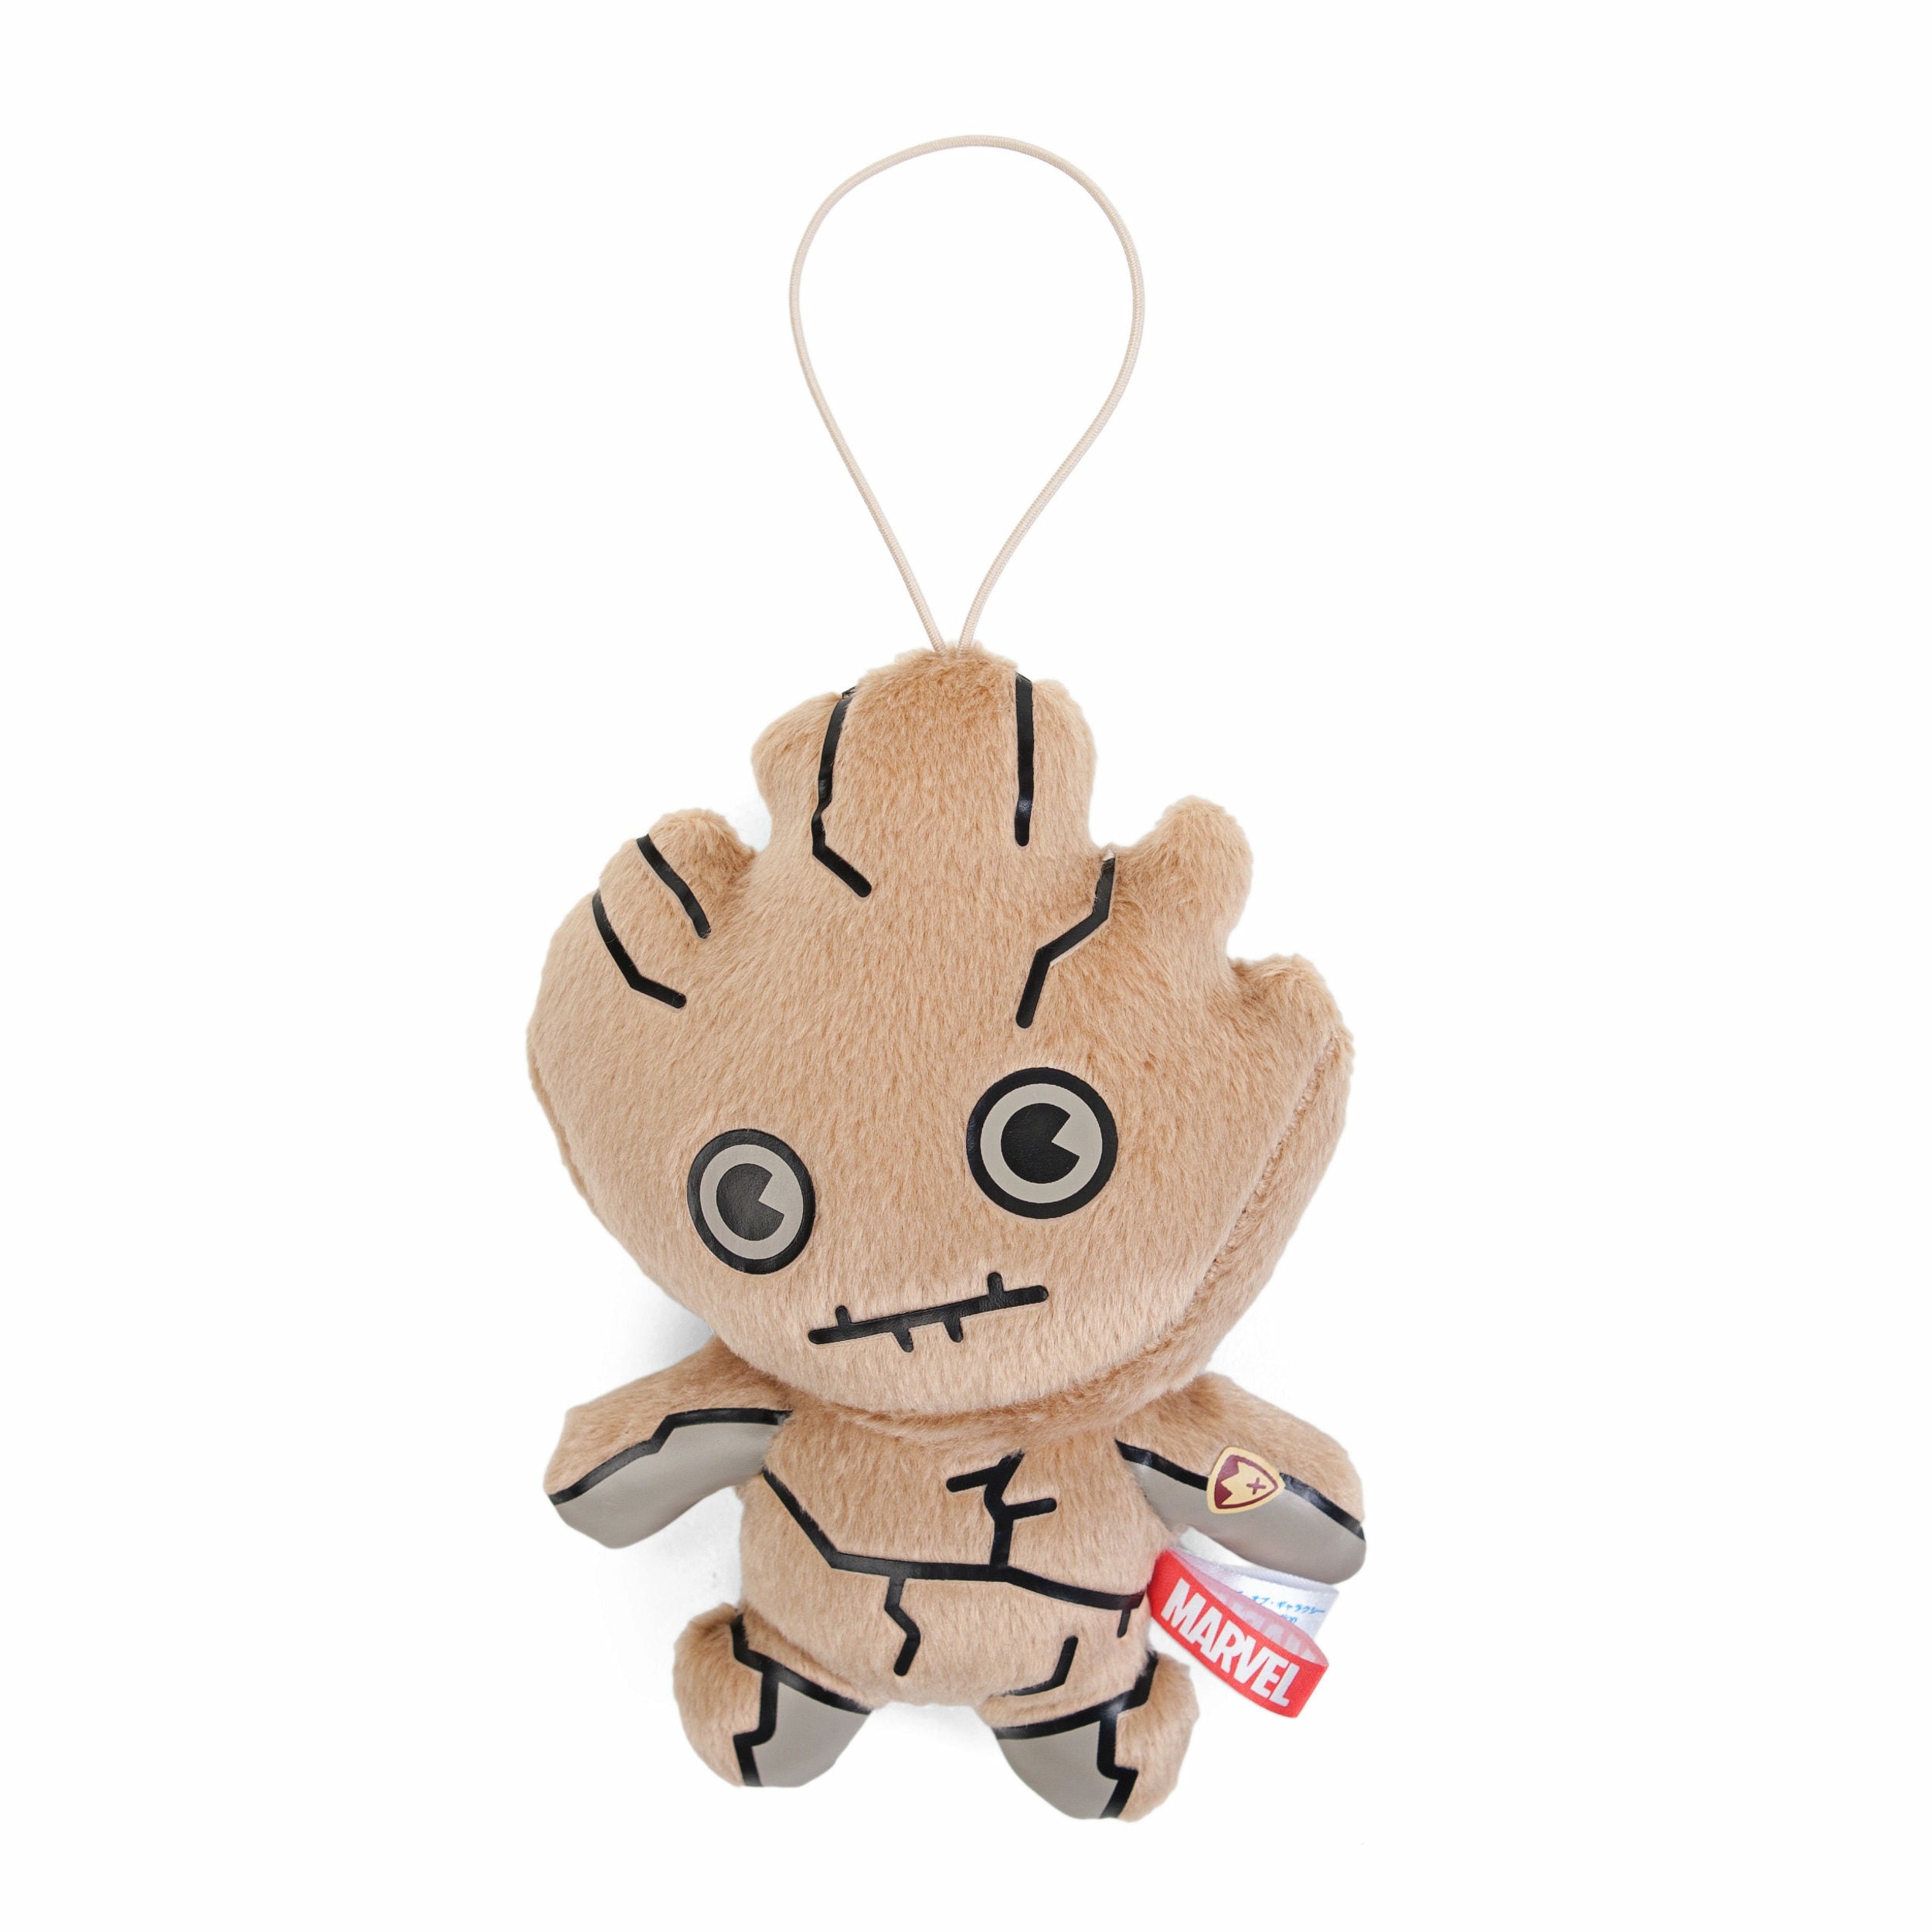 Marvel Guardians of the Galaxy Groot 6 inch Plush Toy